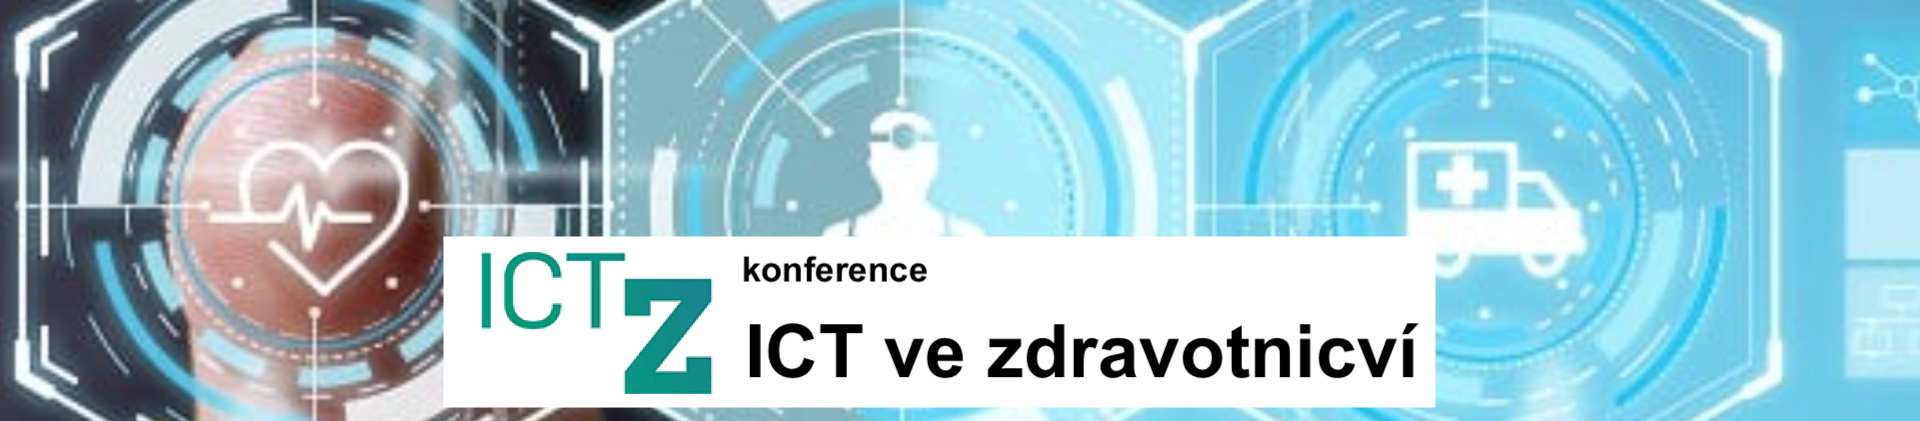 We are partner of ICT in Healthcare conference